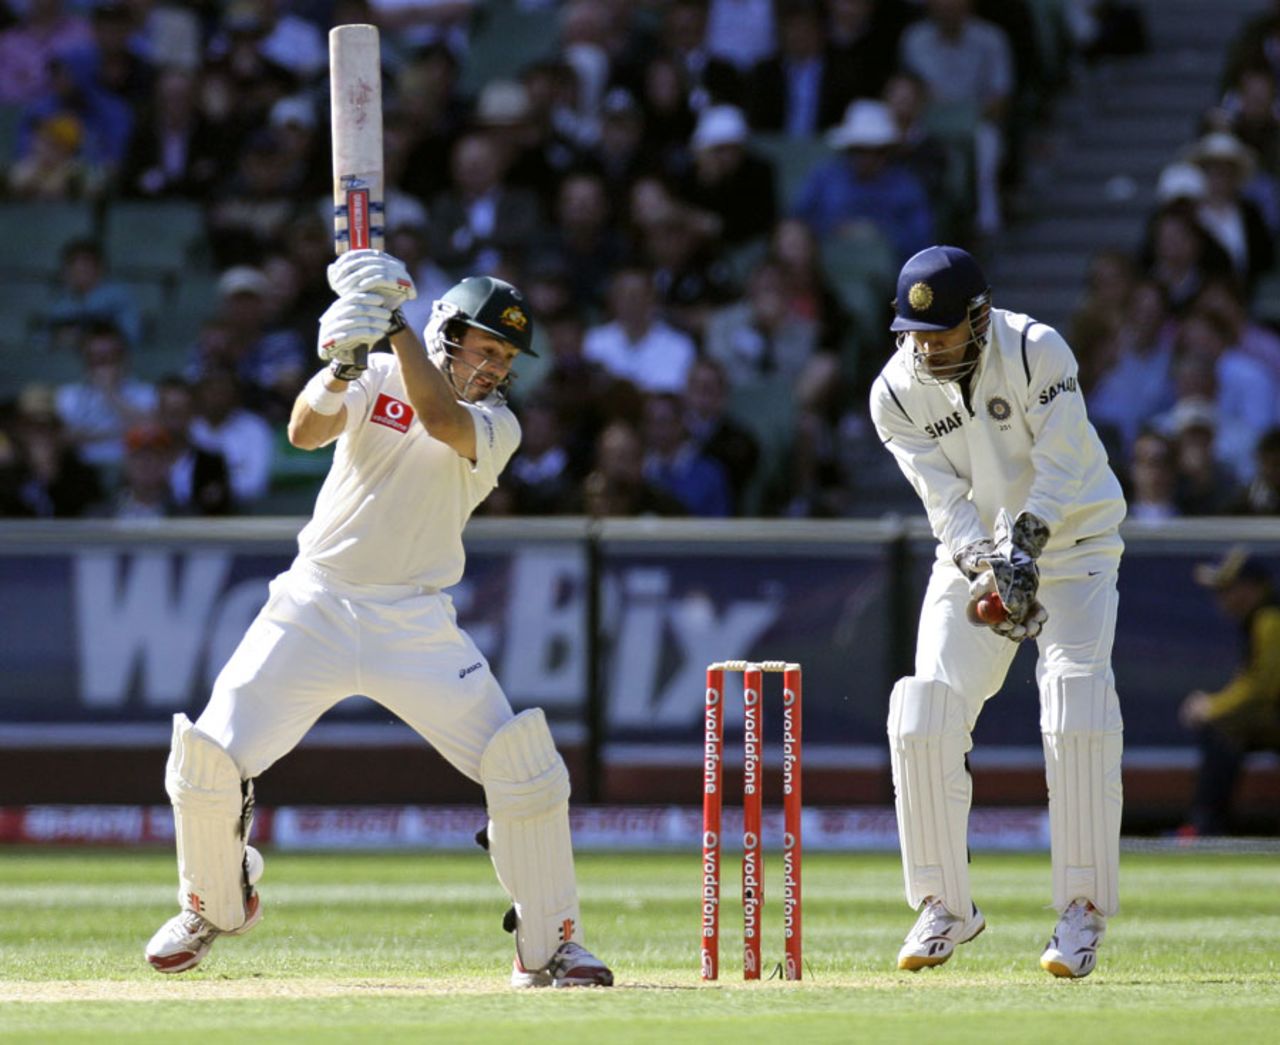 Ed Cowan was given out caught behind, Australia v India, 1st Test, Melbourne, 1st day, December 26, 2011